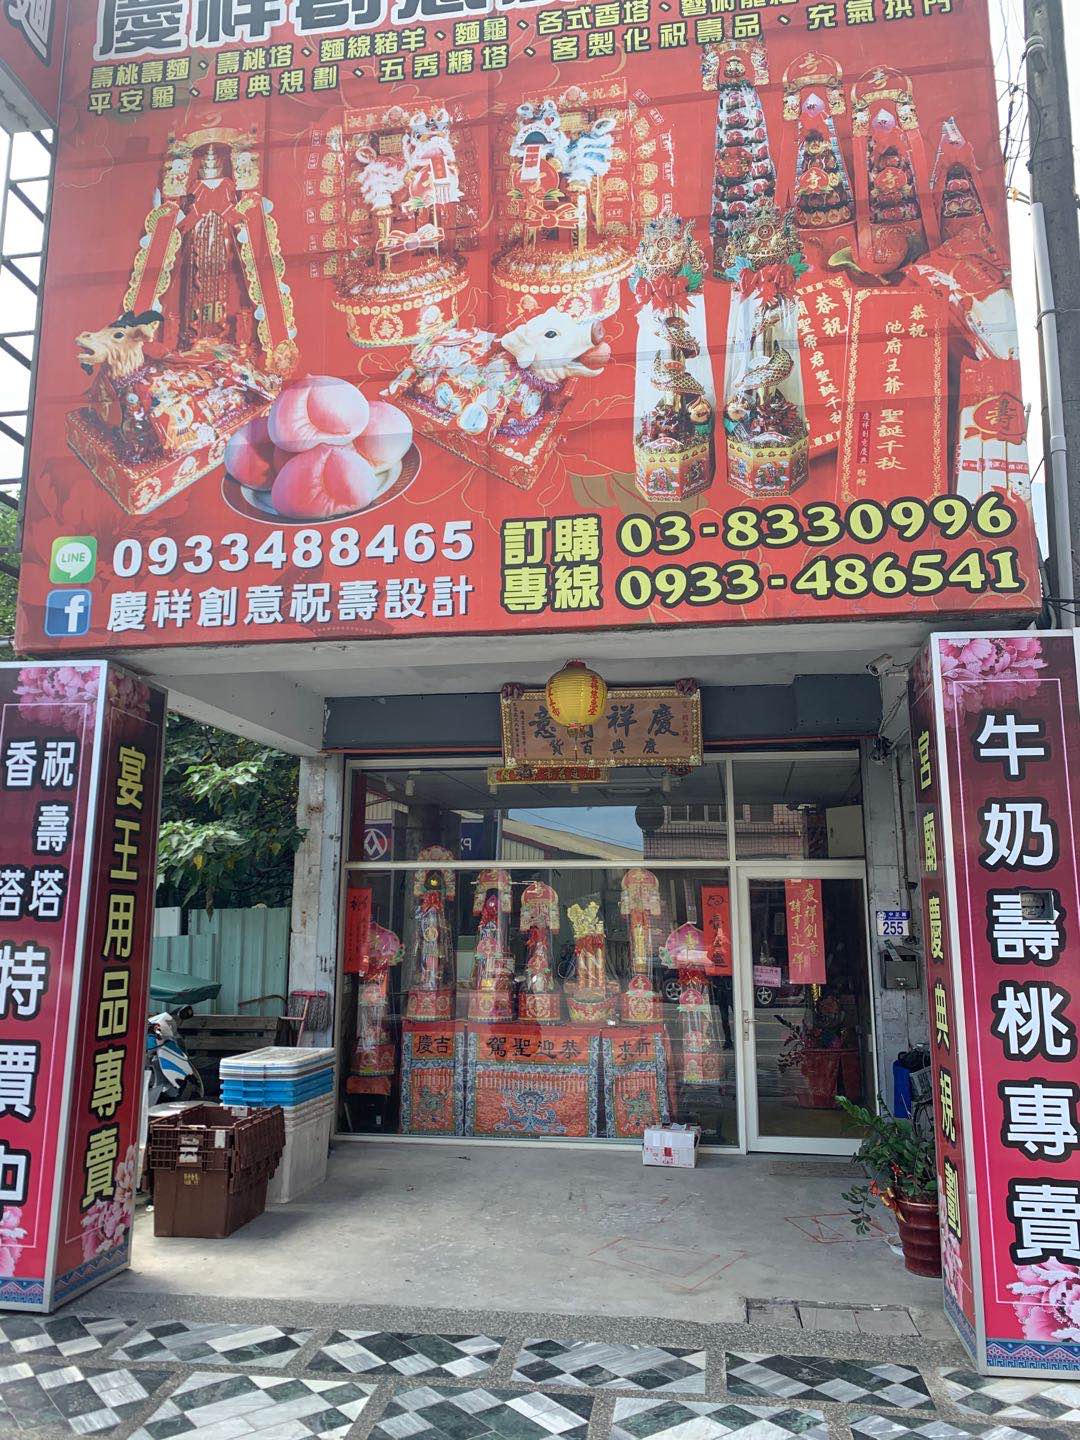 Qing Xiang Religious Goods Store